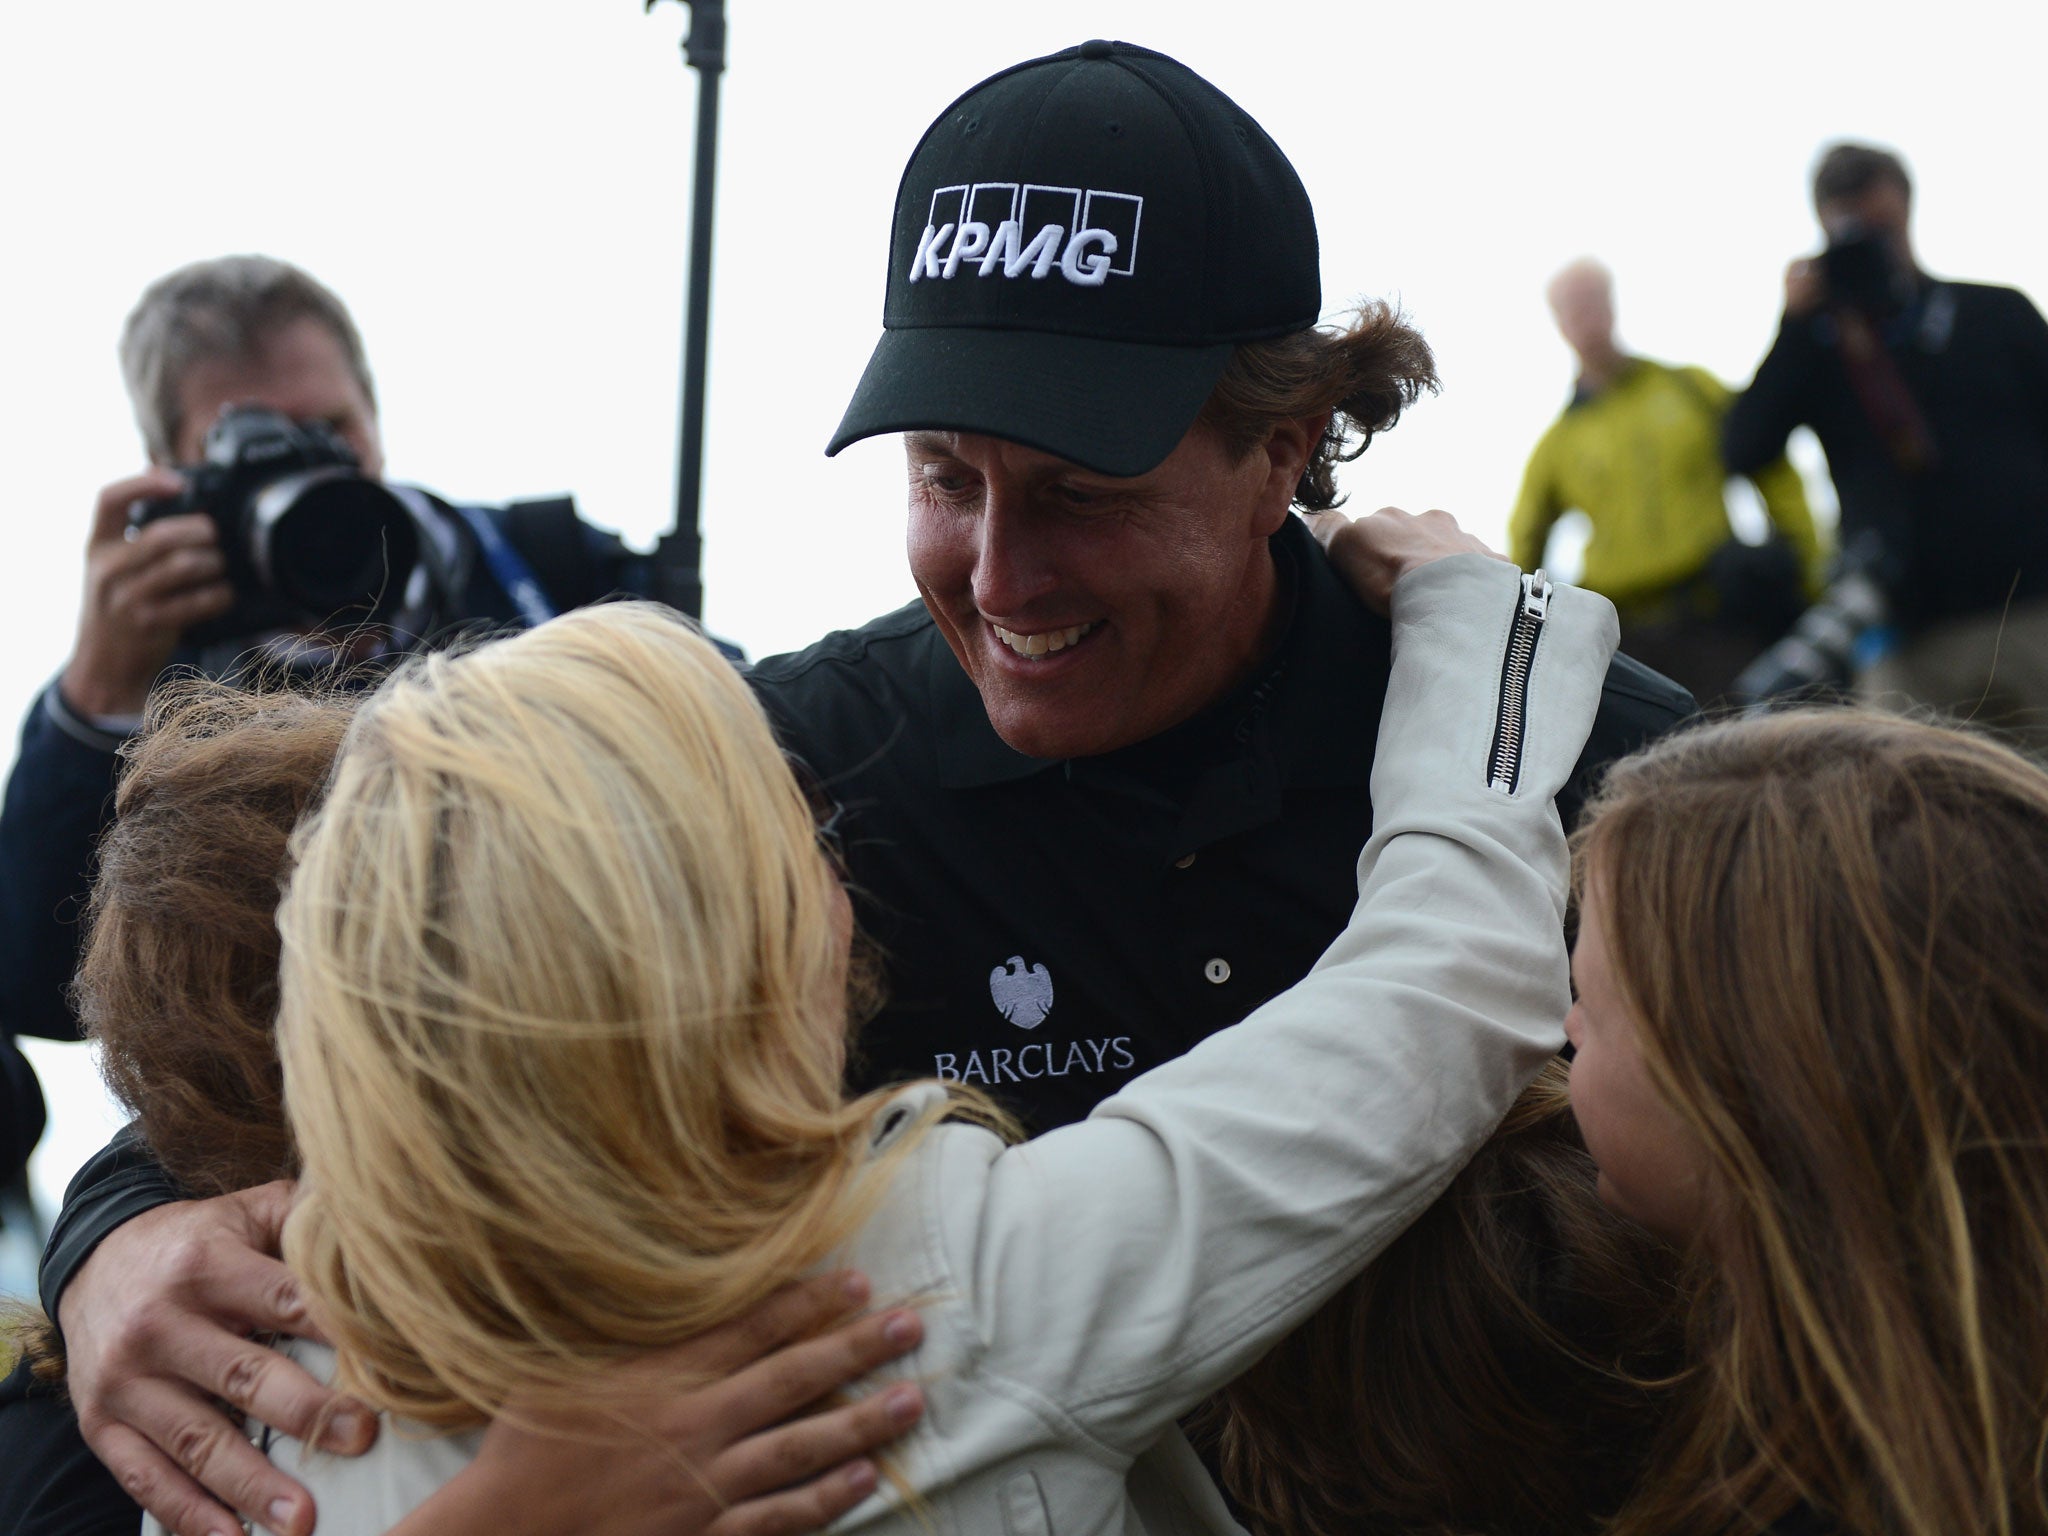 A jubilant Phil Mickelson celebrates winning with his family